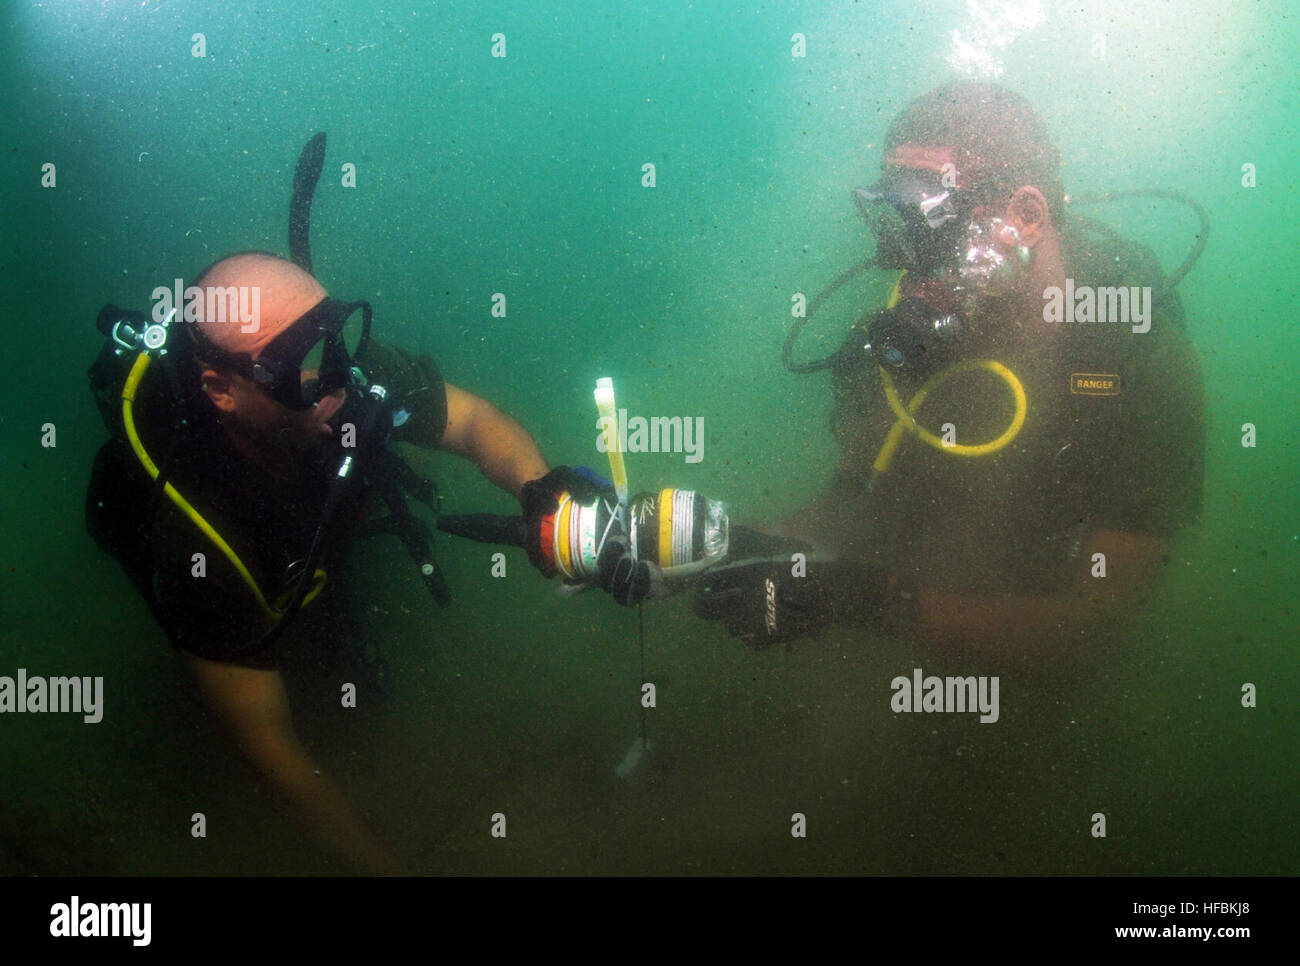 110728-N-XD935-195 PORT ROYAL, Jamaica, (July 28, 2011) Royal Bahamas Defense Force divers, Able Body Seaman Raynaldo Farquharson, left, and Able Body Seaman Omar Albury find an inert training mine on the sea floor utilizing a circle search line during joint diving search operations with Mobile Diving and Salvage Unit (MDSU) 2. MDSU-2 is participating in Navy Diver-Southern Partnership Station, a multinational partnership engagement designed to increase interoperability and partner nation capacity through diving operations. (U.S. Navy photo by Mass Communication Specialist 1st Class Jayme Past Stock Photo